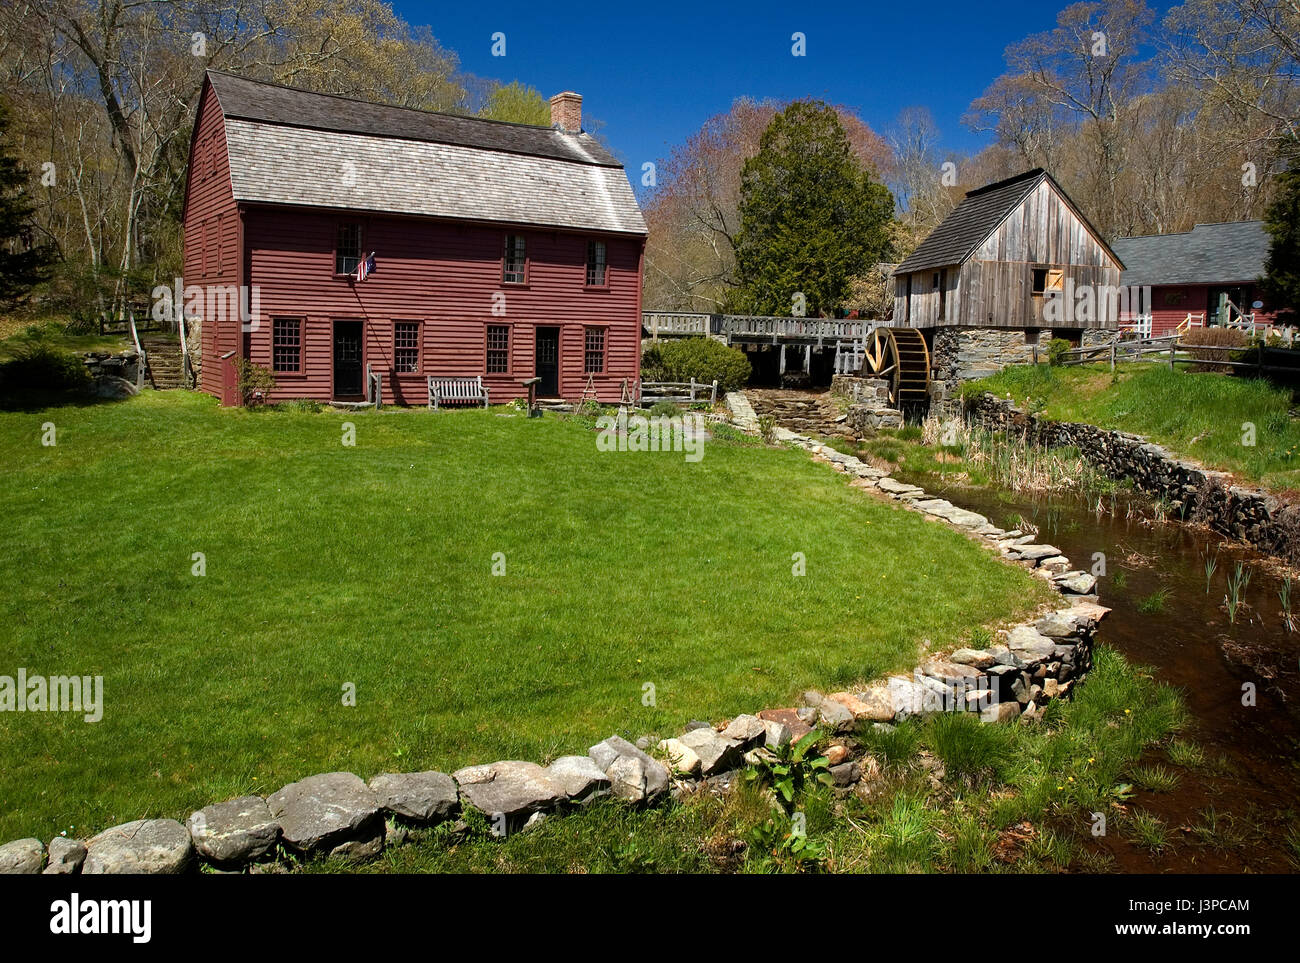 Gilbert Stuart Birthplace and Museum - Saunderstown , Rhode Island   The Gilbert Stuart Birthplace and Museum is situated on 23 acres in the woods of  Stock Photo